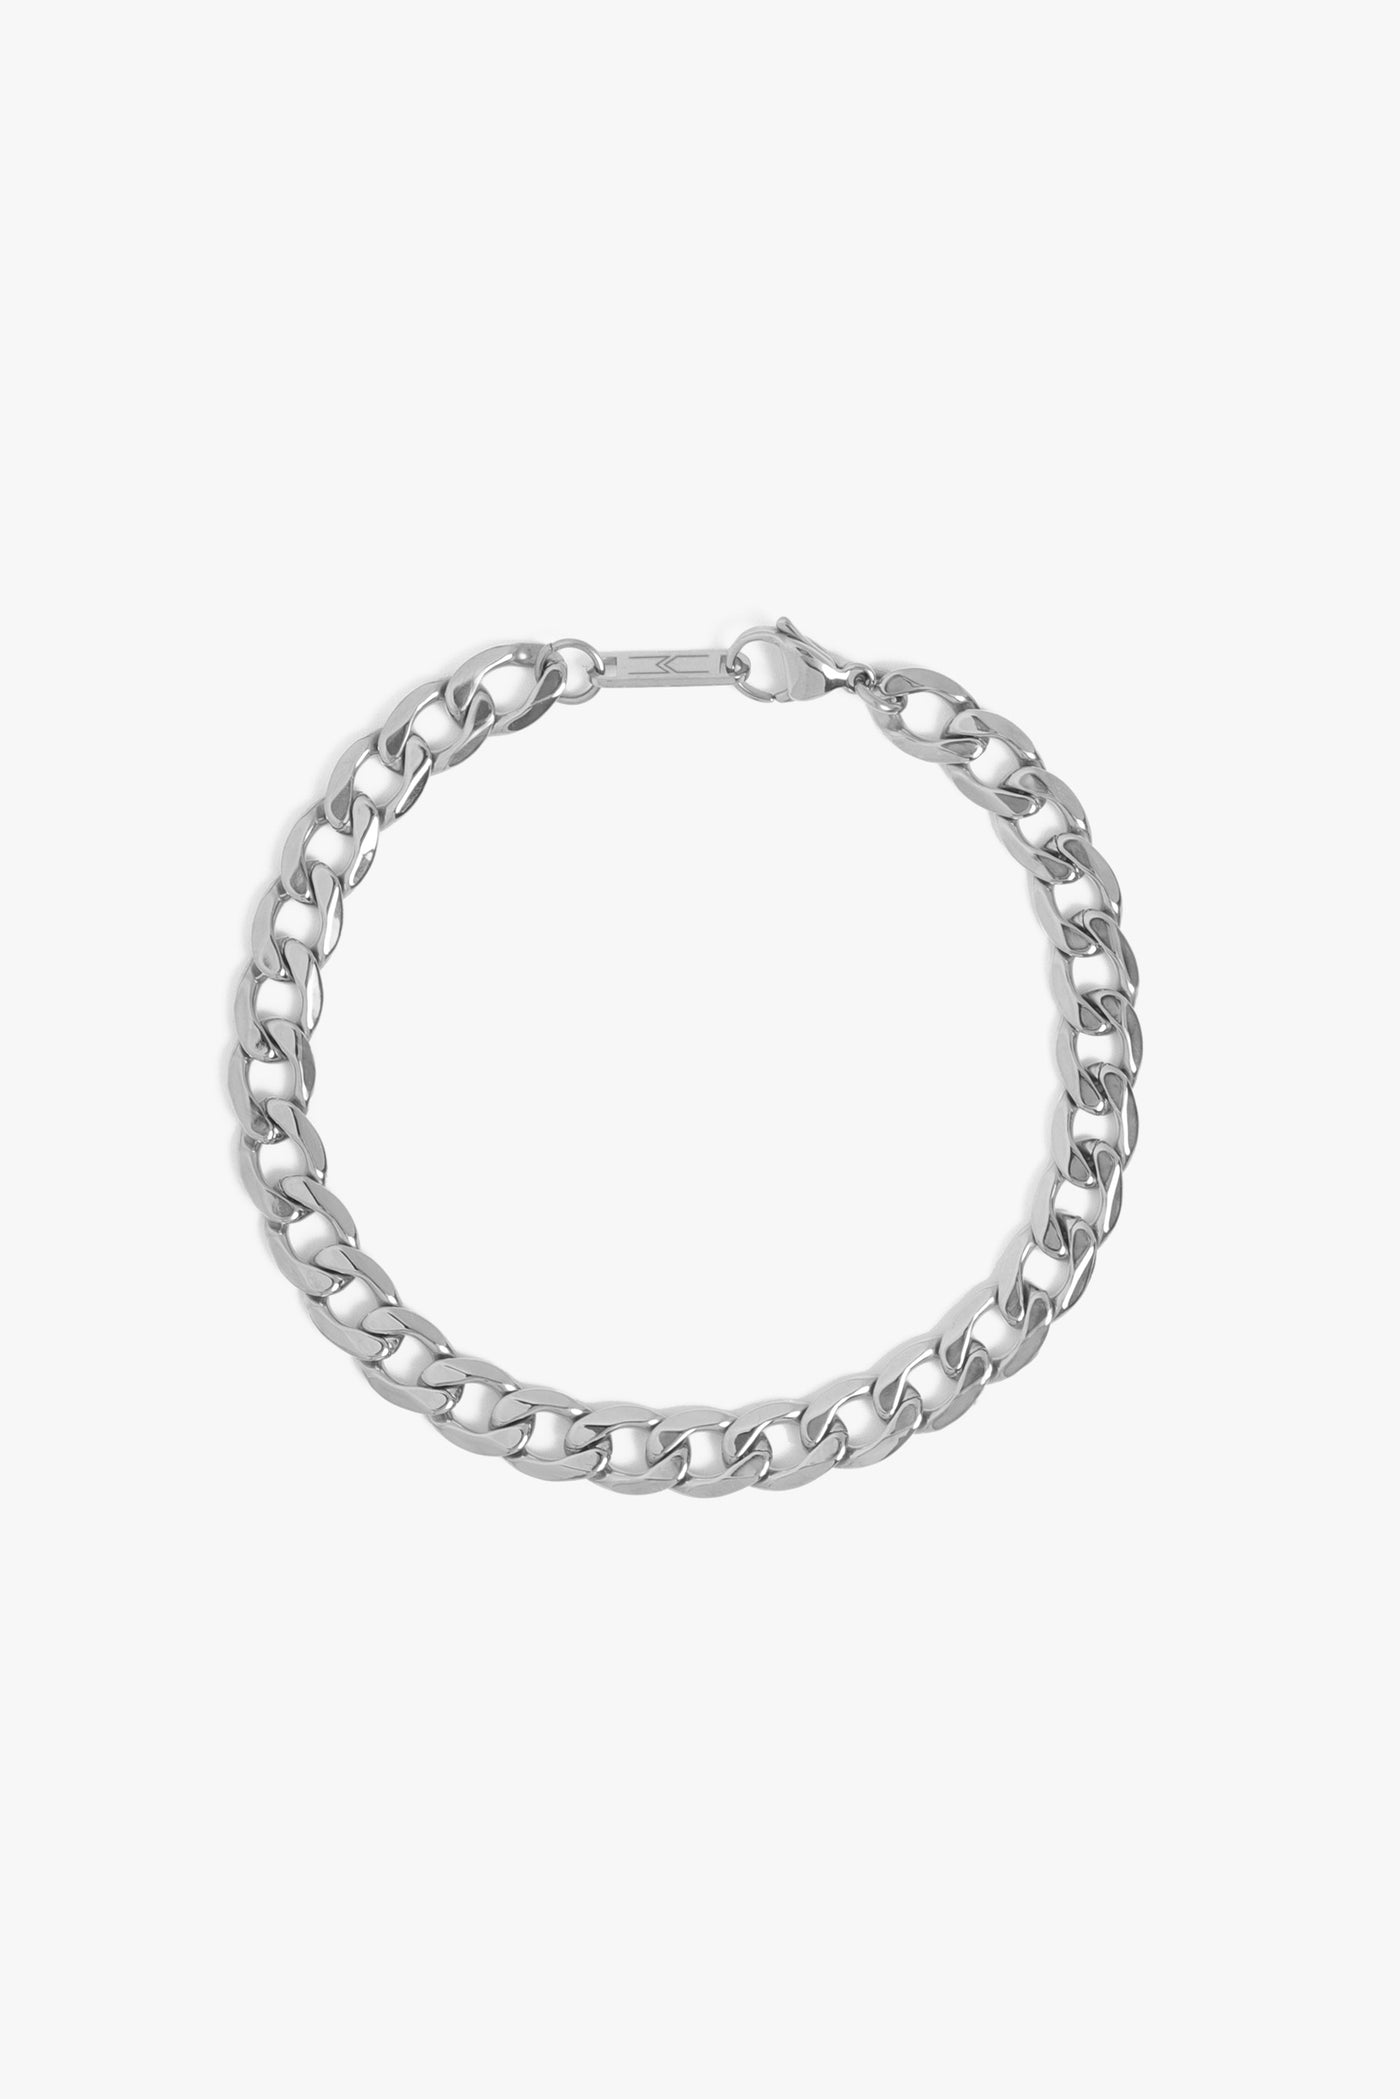 Marrin Costello Jewelry Kings Anklet flat cuban link chain bracelet with lobster clasp closure. Waterproof, sustainable, hypoallergenic. Polished stainless steel.